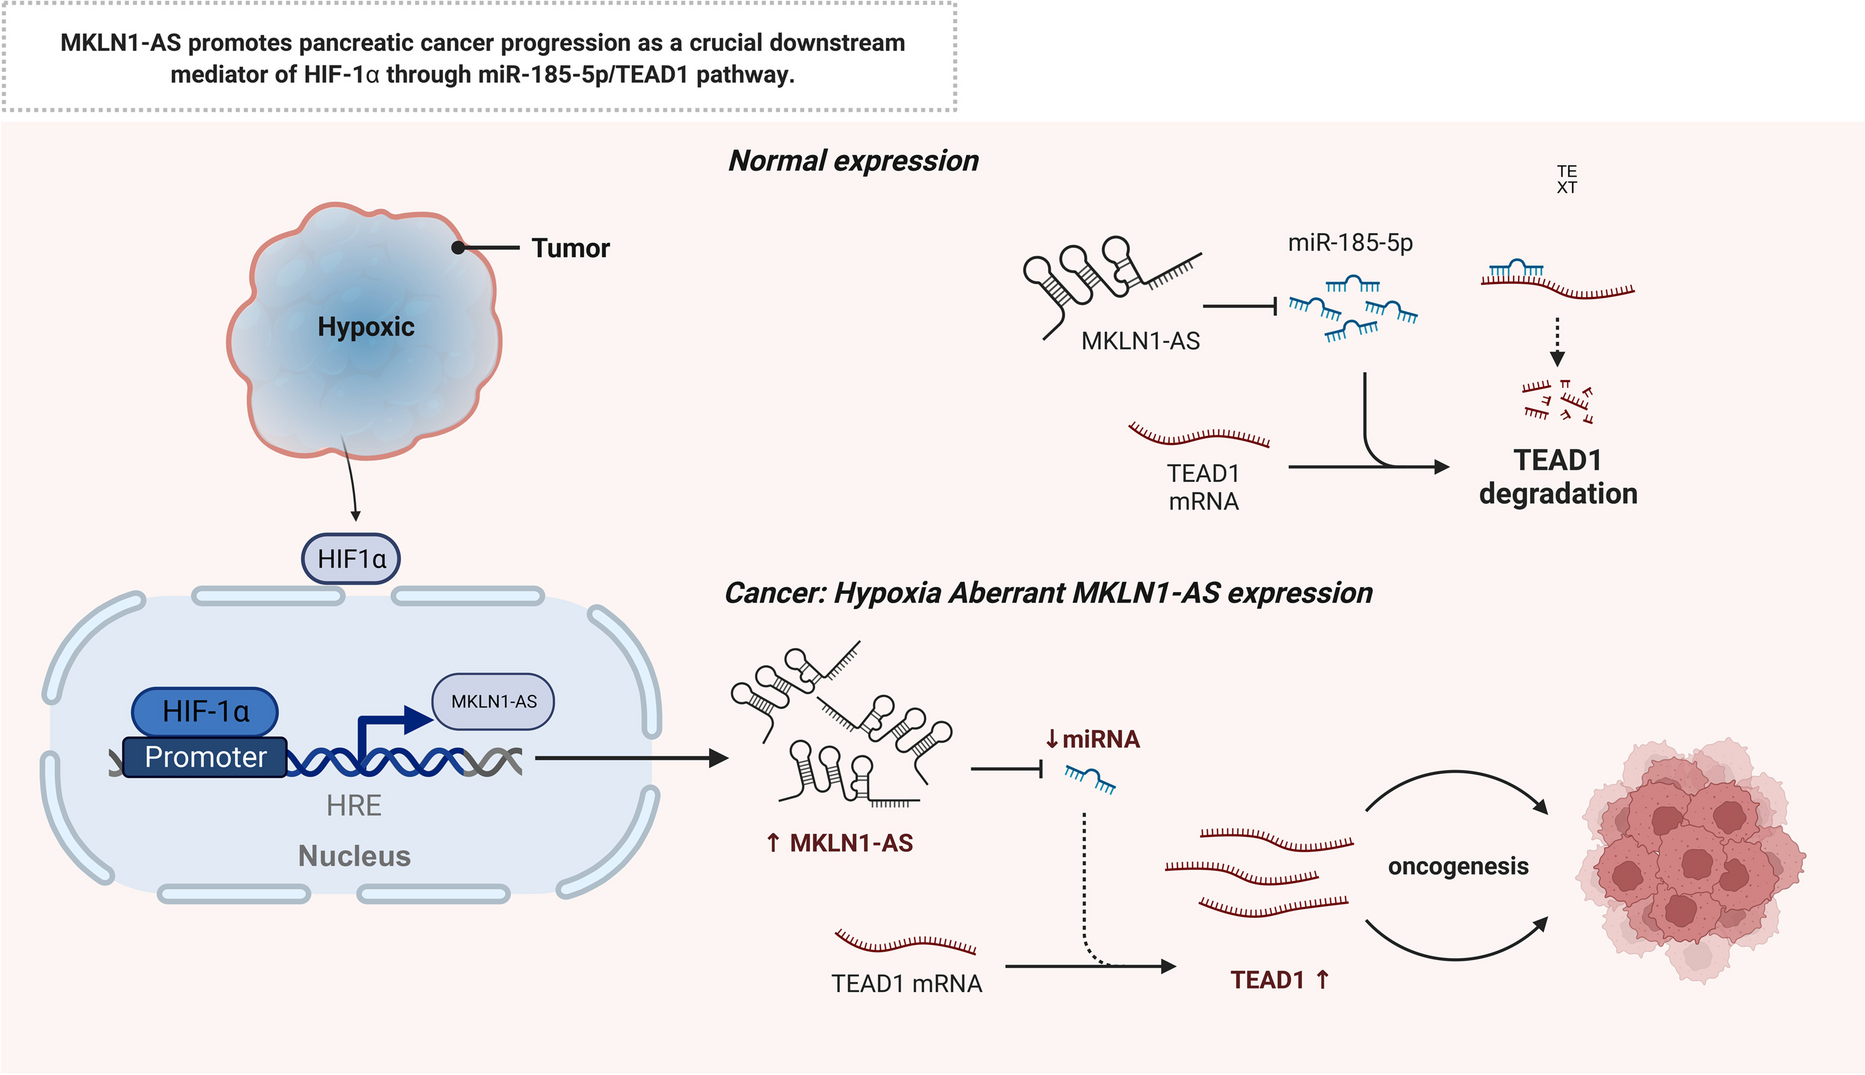 MKLN1-AS promotes pancreatic cancer progression as a crucial downstream mediator of HIF-1α through miR-185-5p/TEAD1 pathway